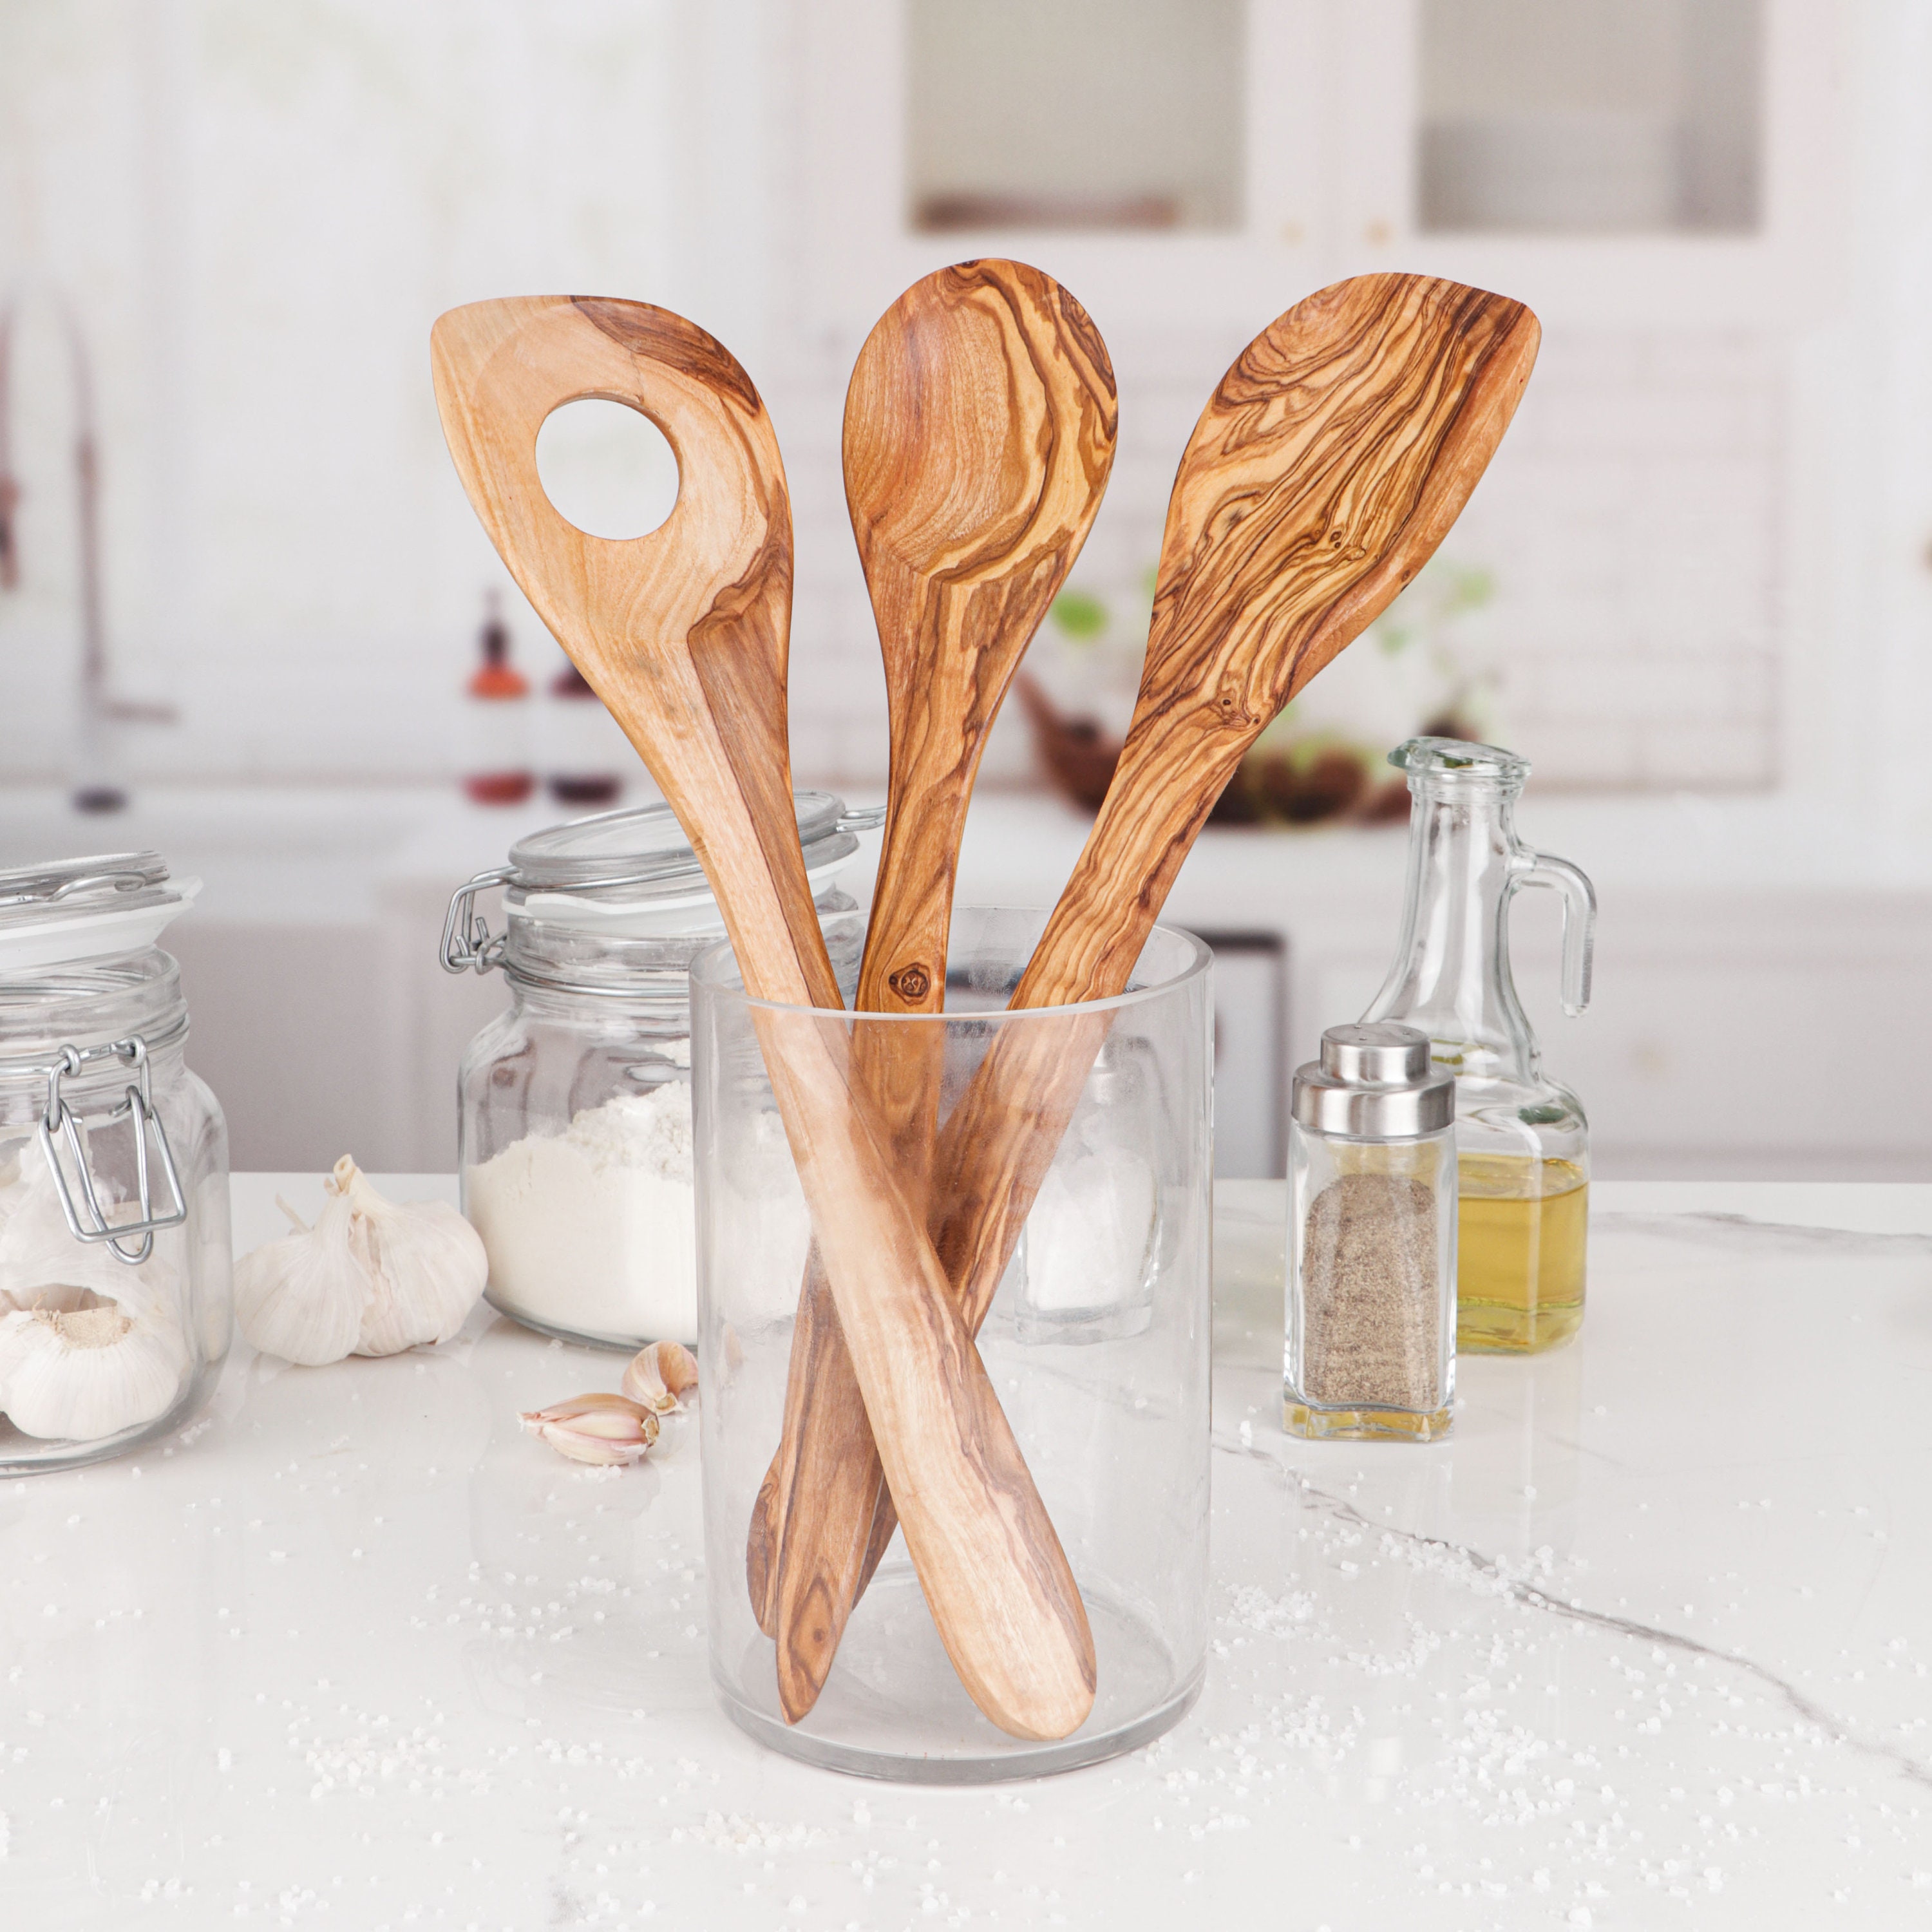 Personalized Olive Wood Cooking Spoons with Corner (Set of 2) – Forest Decor